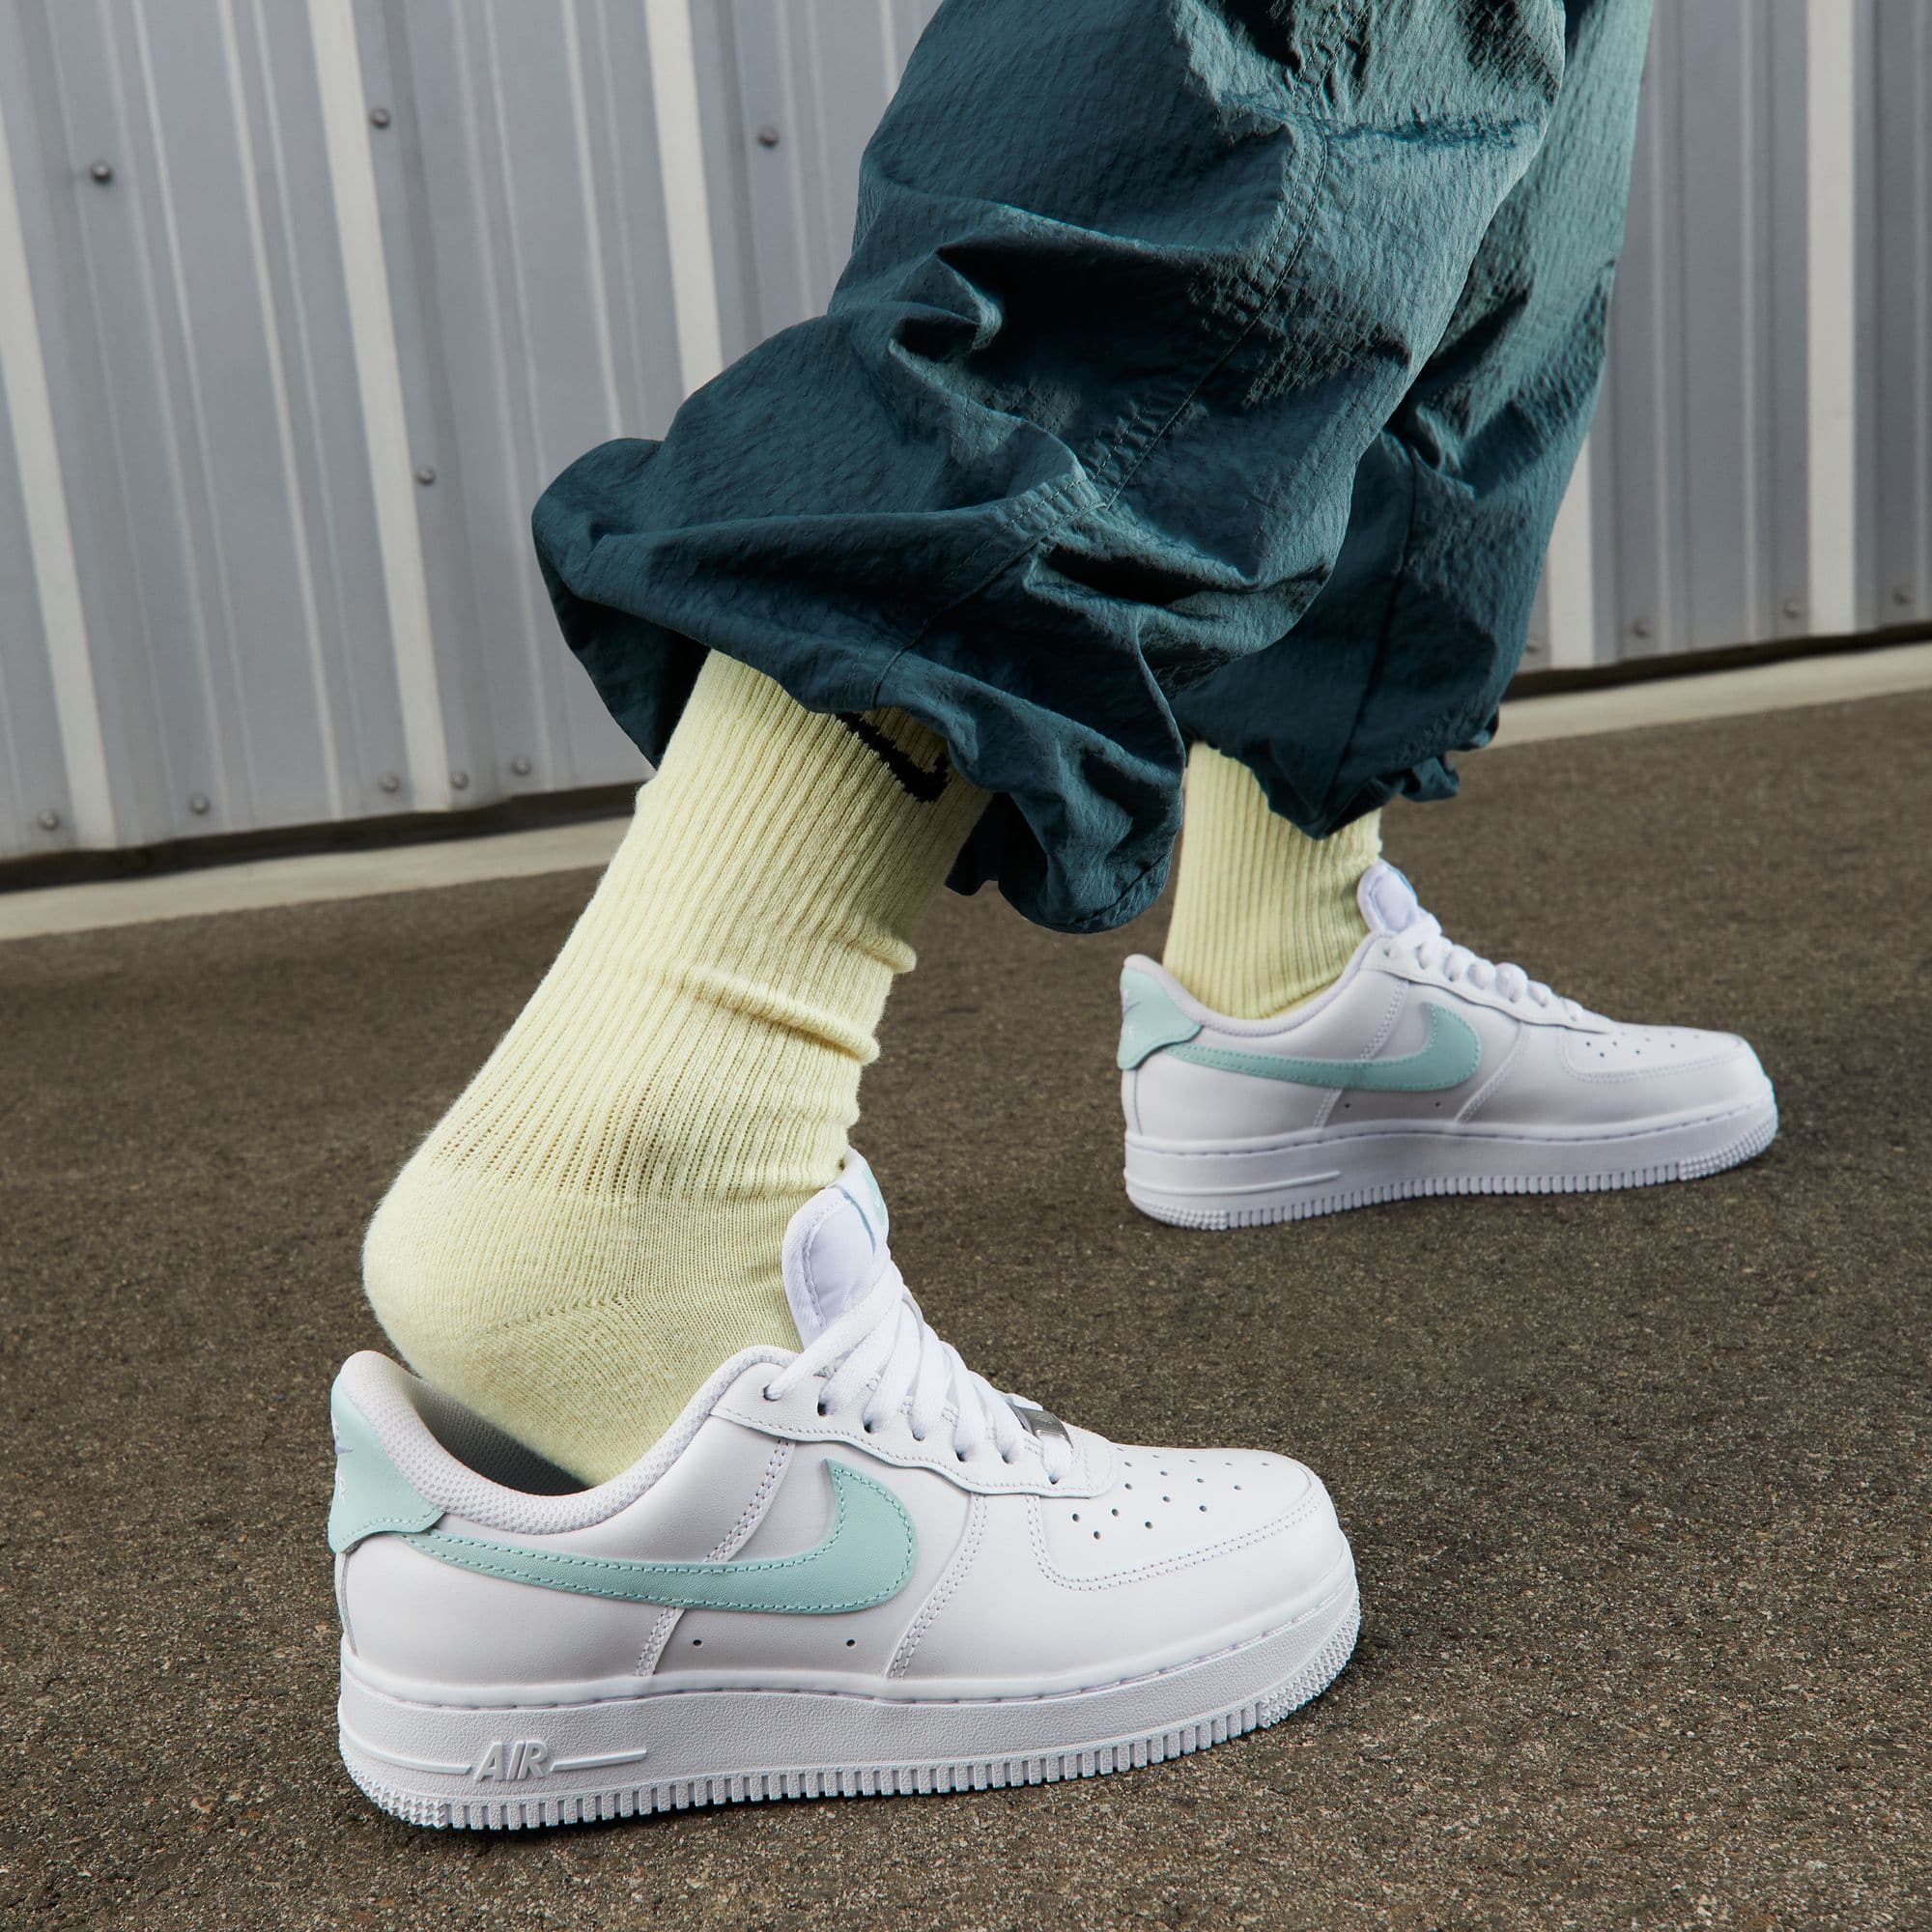 GIÀY THỂ THAO NIKE NỮ AIR FORCE 1 07 EASYON WHITE ICE JADE WOMENS SHOES DX5883-101 5